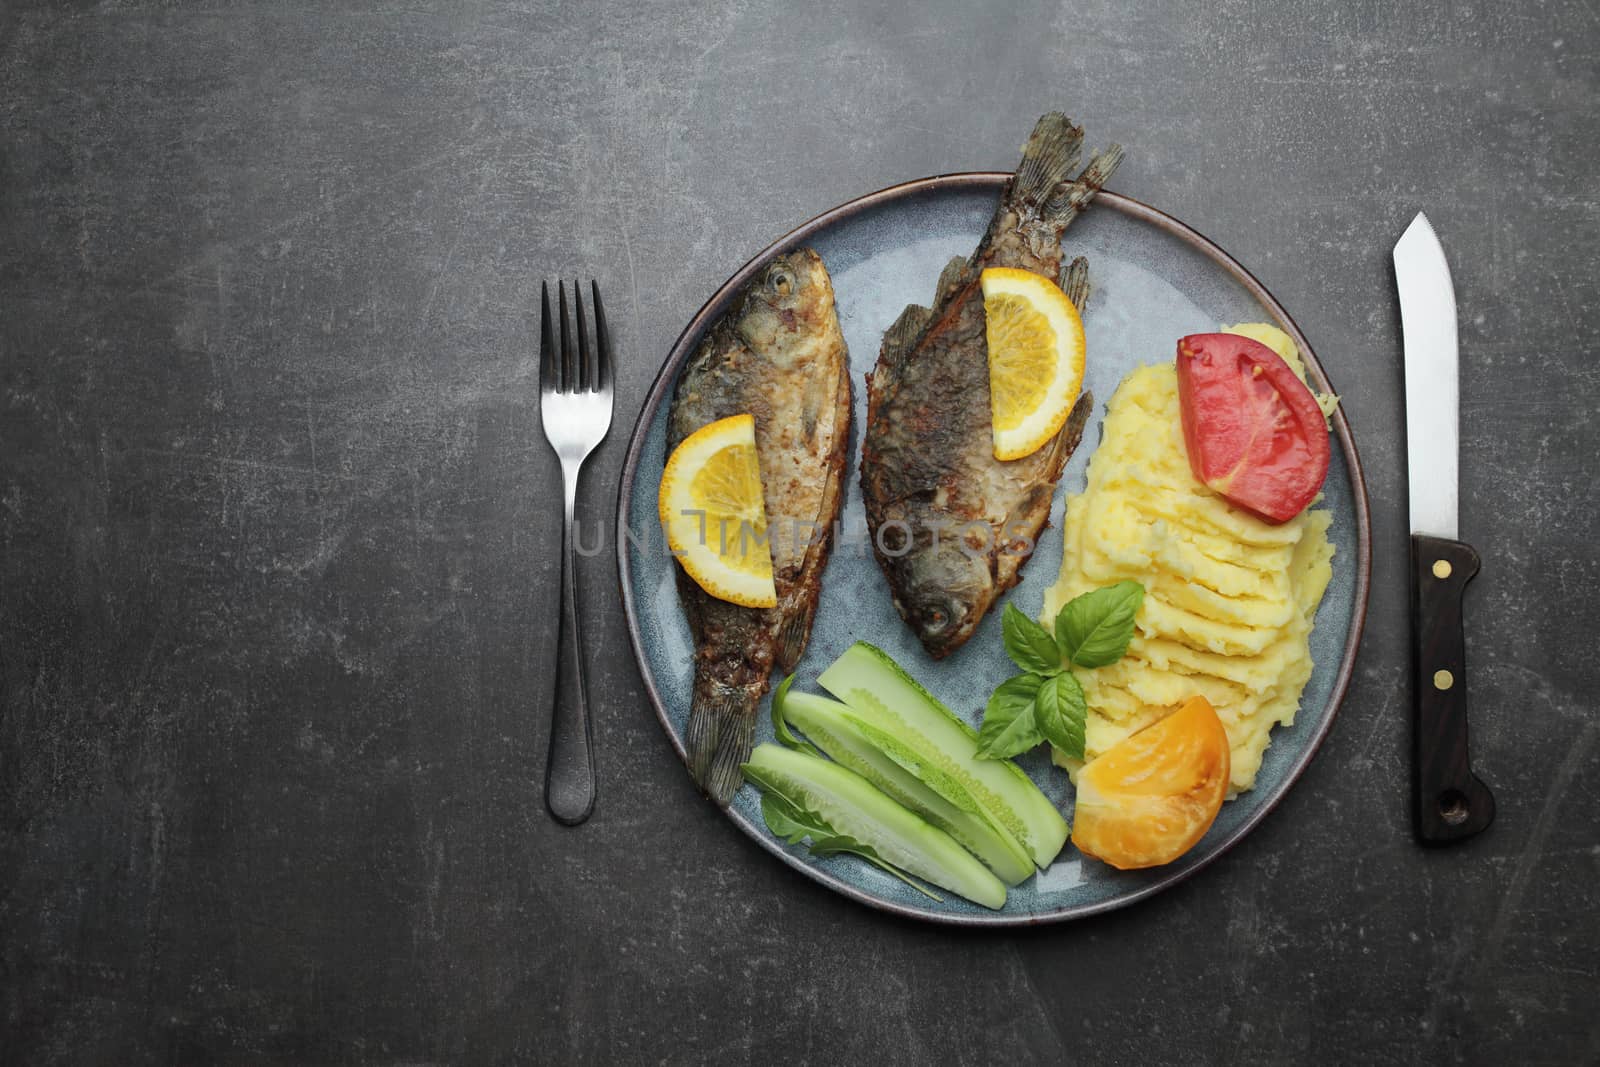 Fried fish and vegetables on a plate. Concrete gray countertop by selinsmo